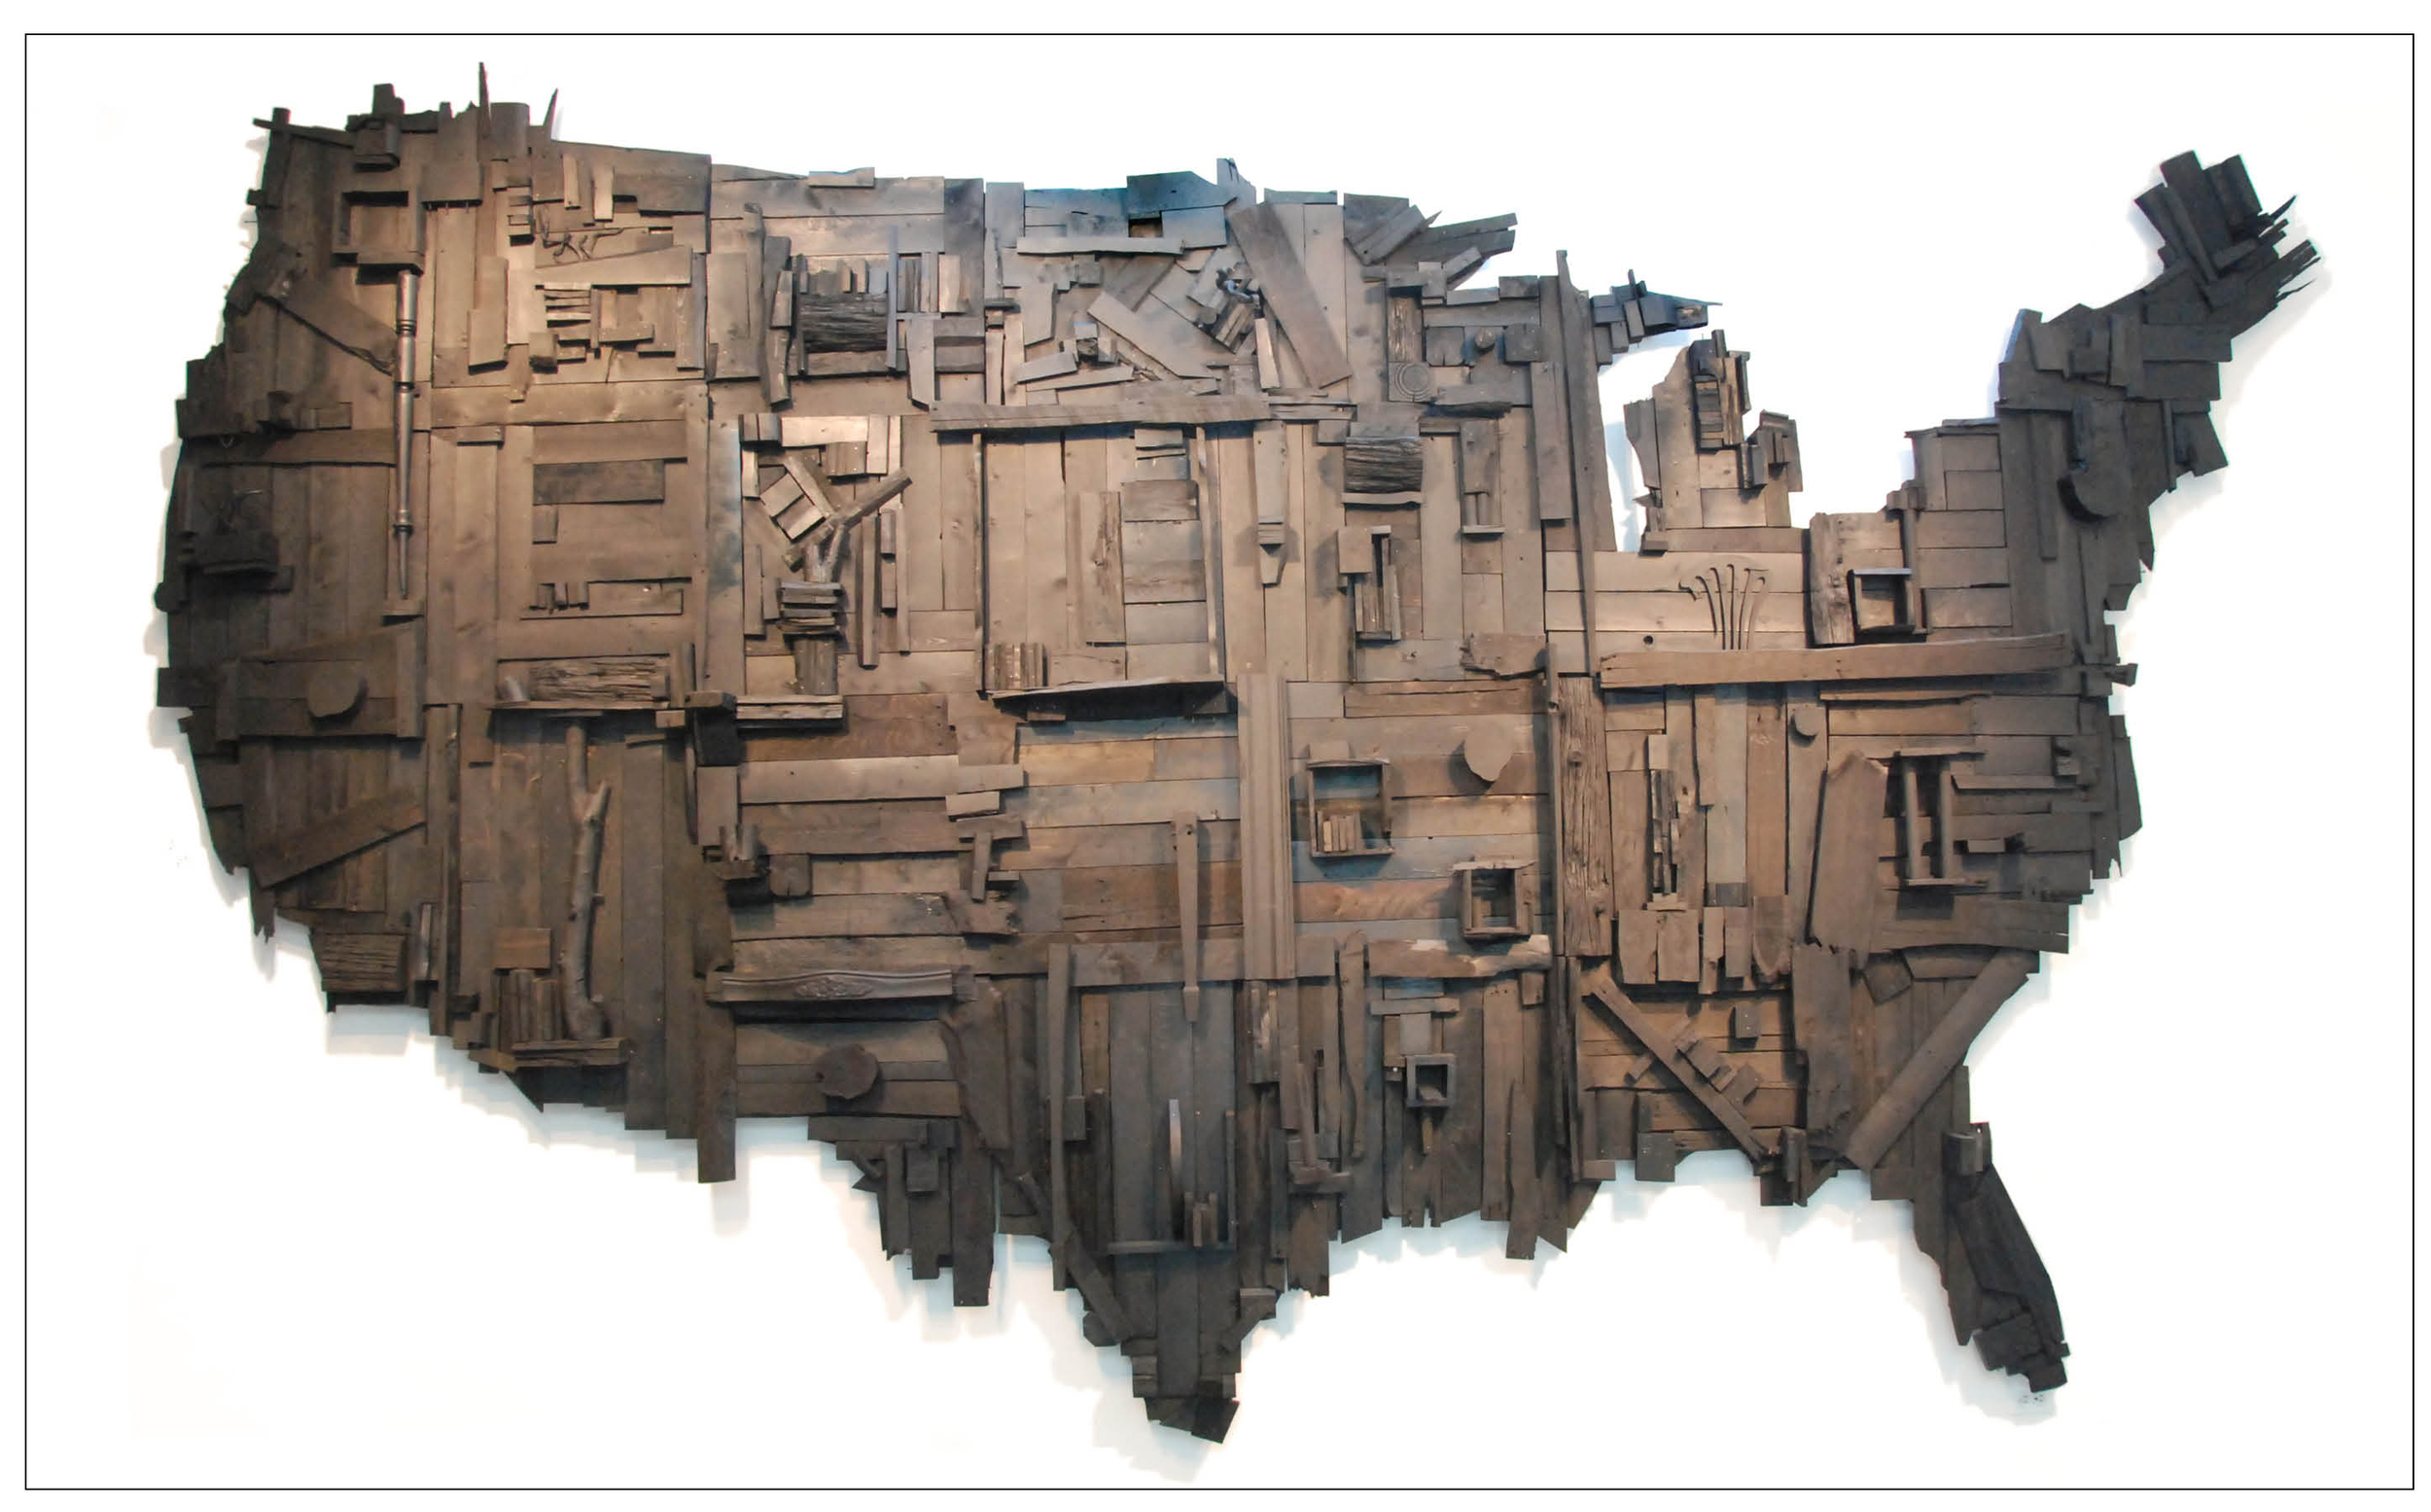  My Big Black America  16ft. x 10ft. x 14”  stain, spray paint, latex, salvaged wood  2015  *Sold - Asheville Art Museum permanent collection 